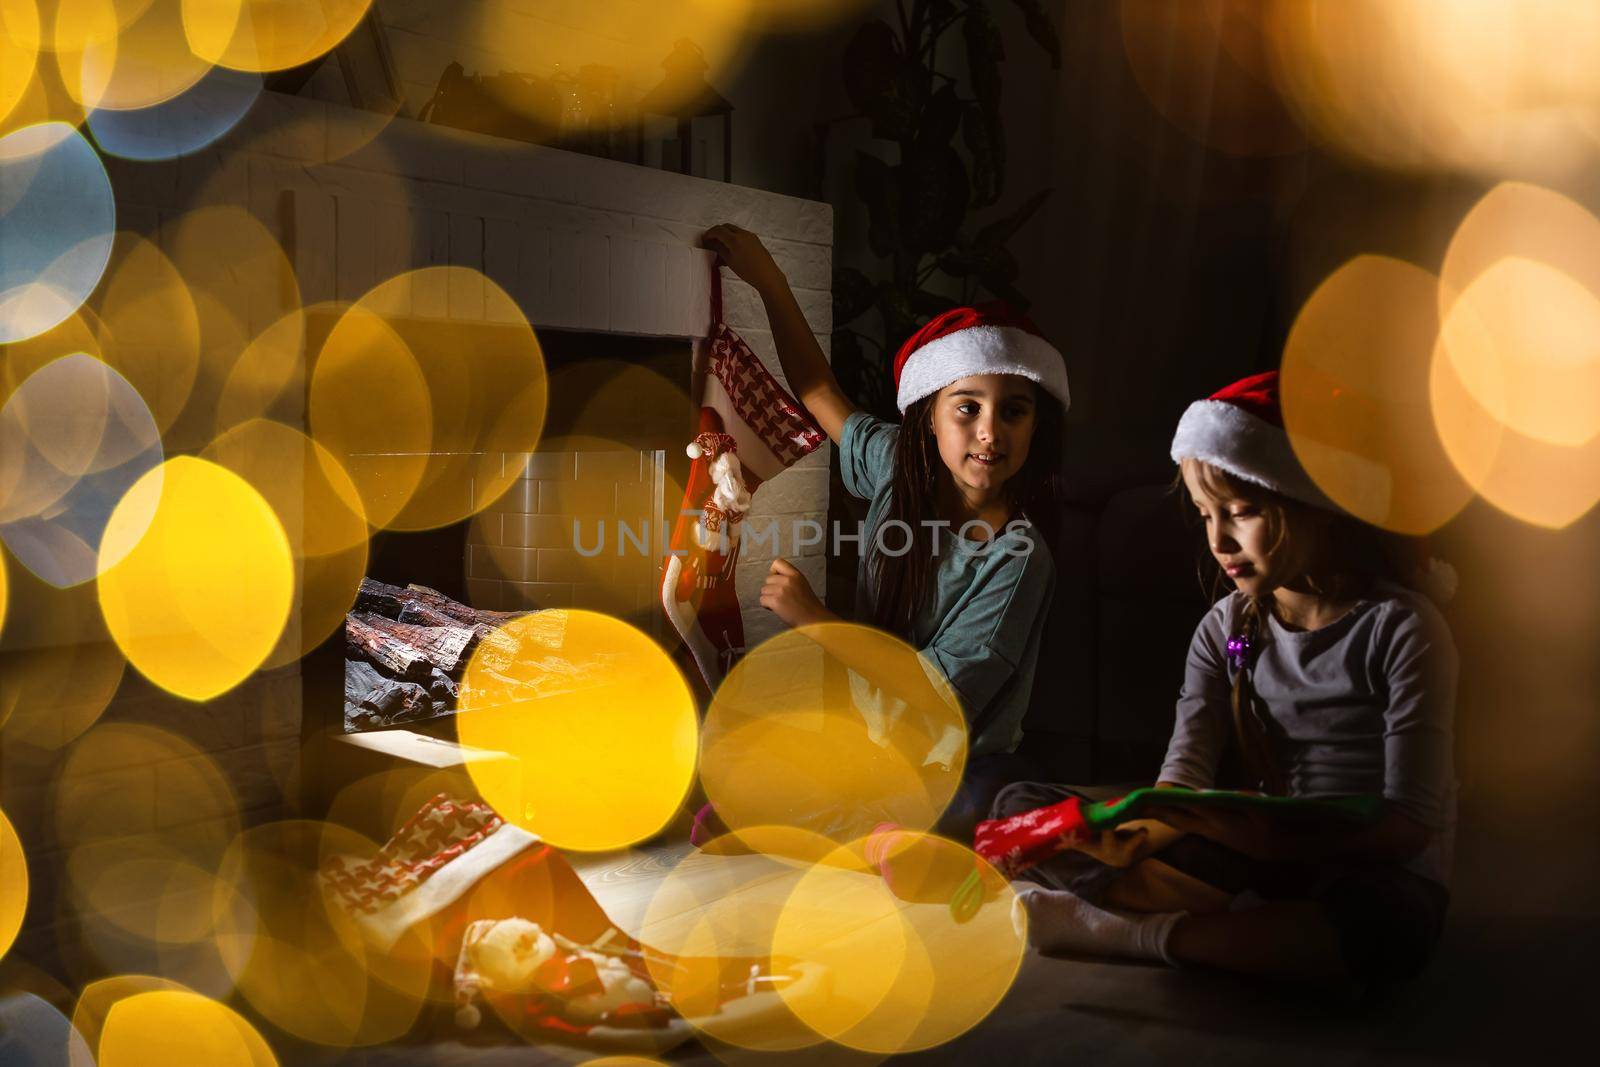 Little kids opening presents next to the fireplace in a cozy home celebrating Christmas